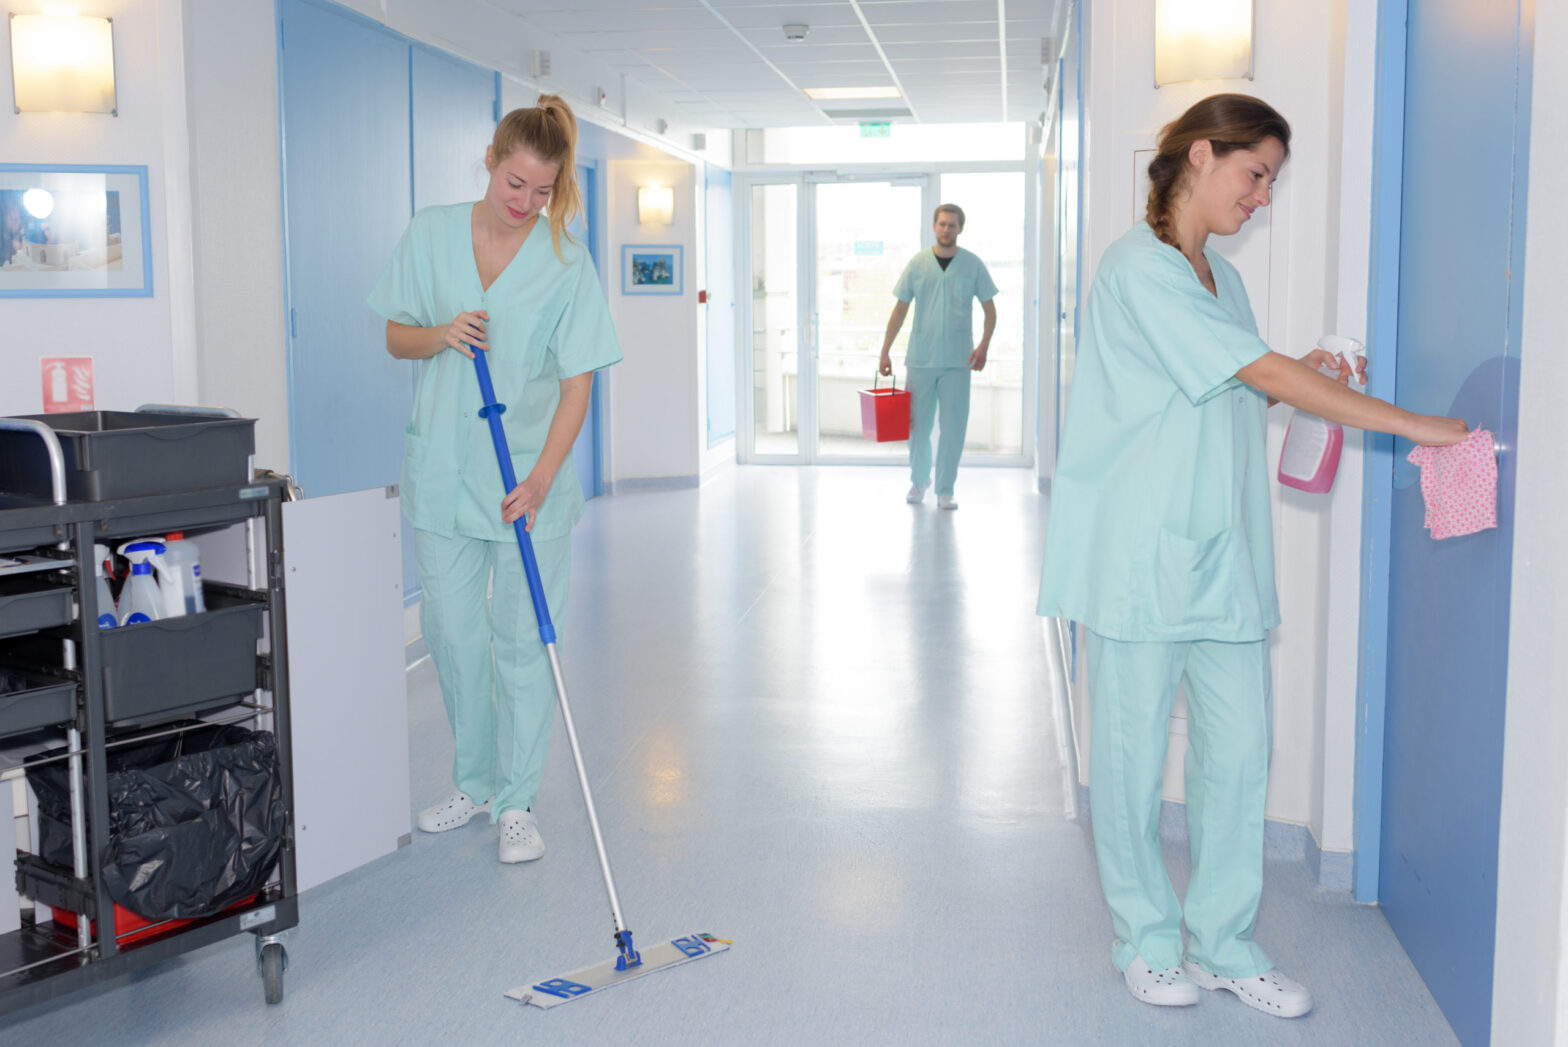 Medical Cleaning Devices Market